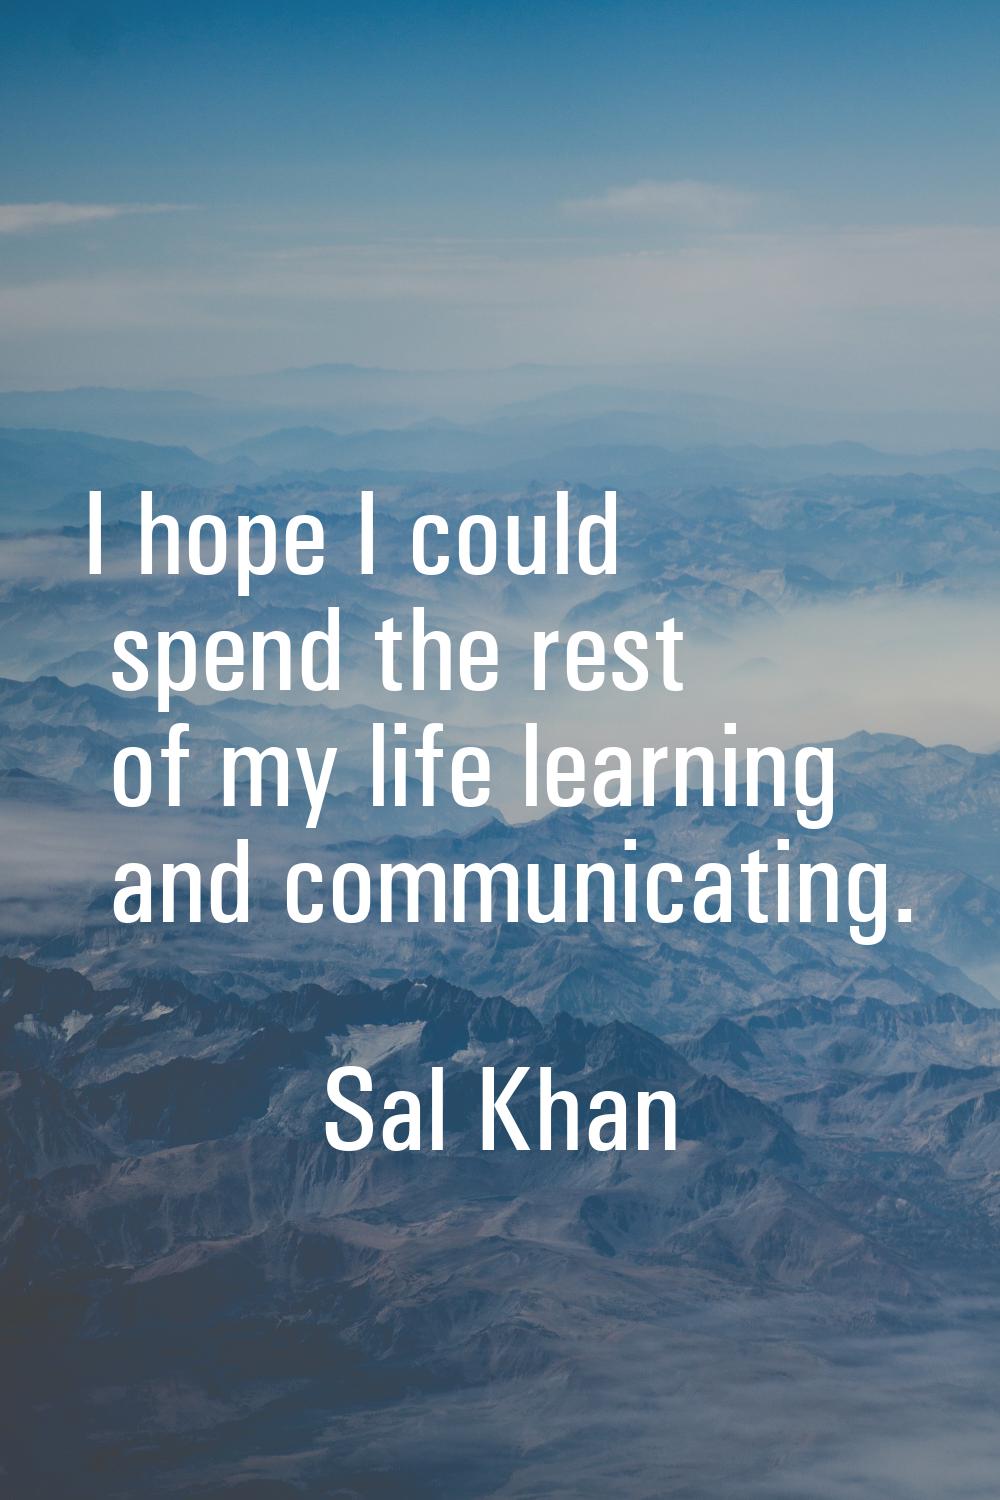 I hope I could spend the rest of my life learning and communicating.